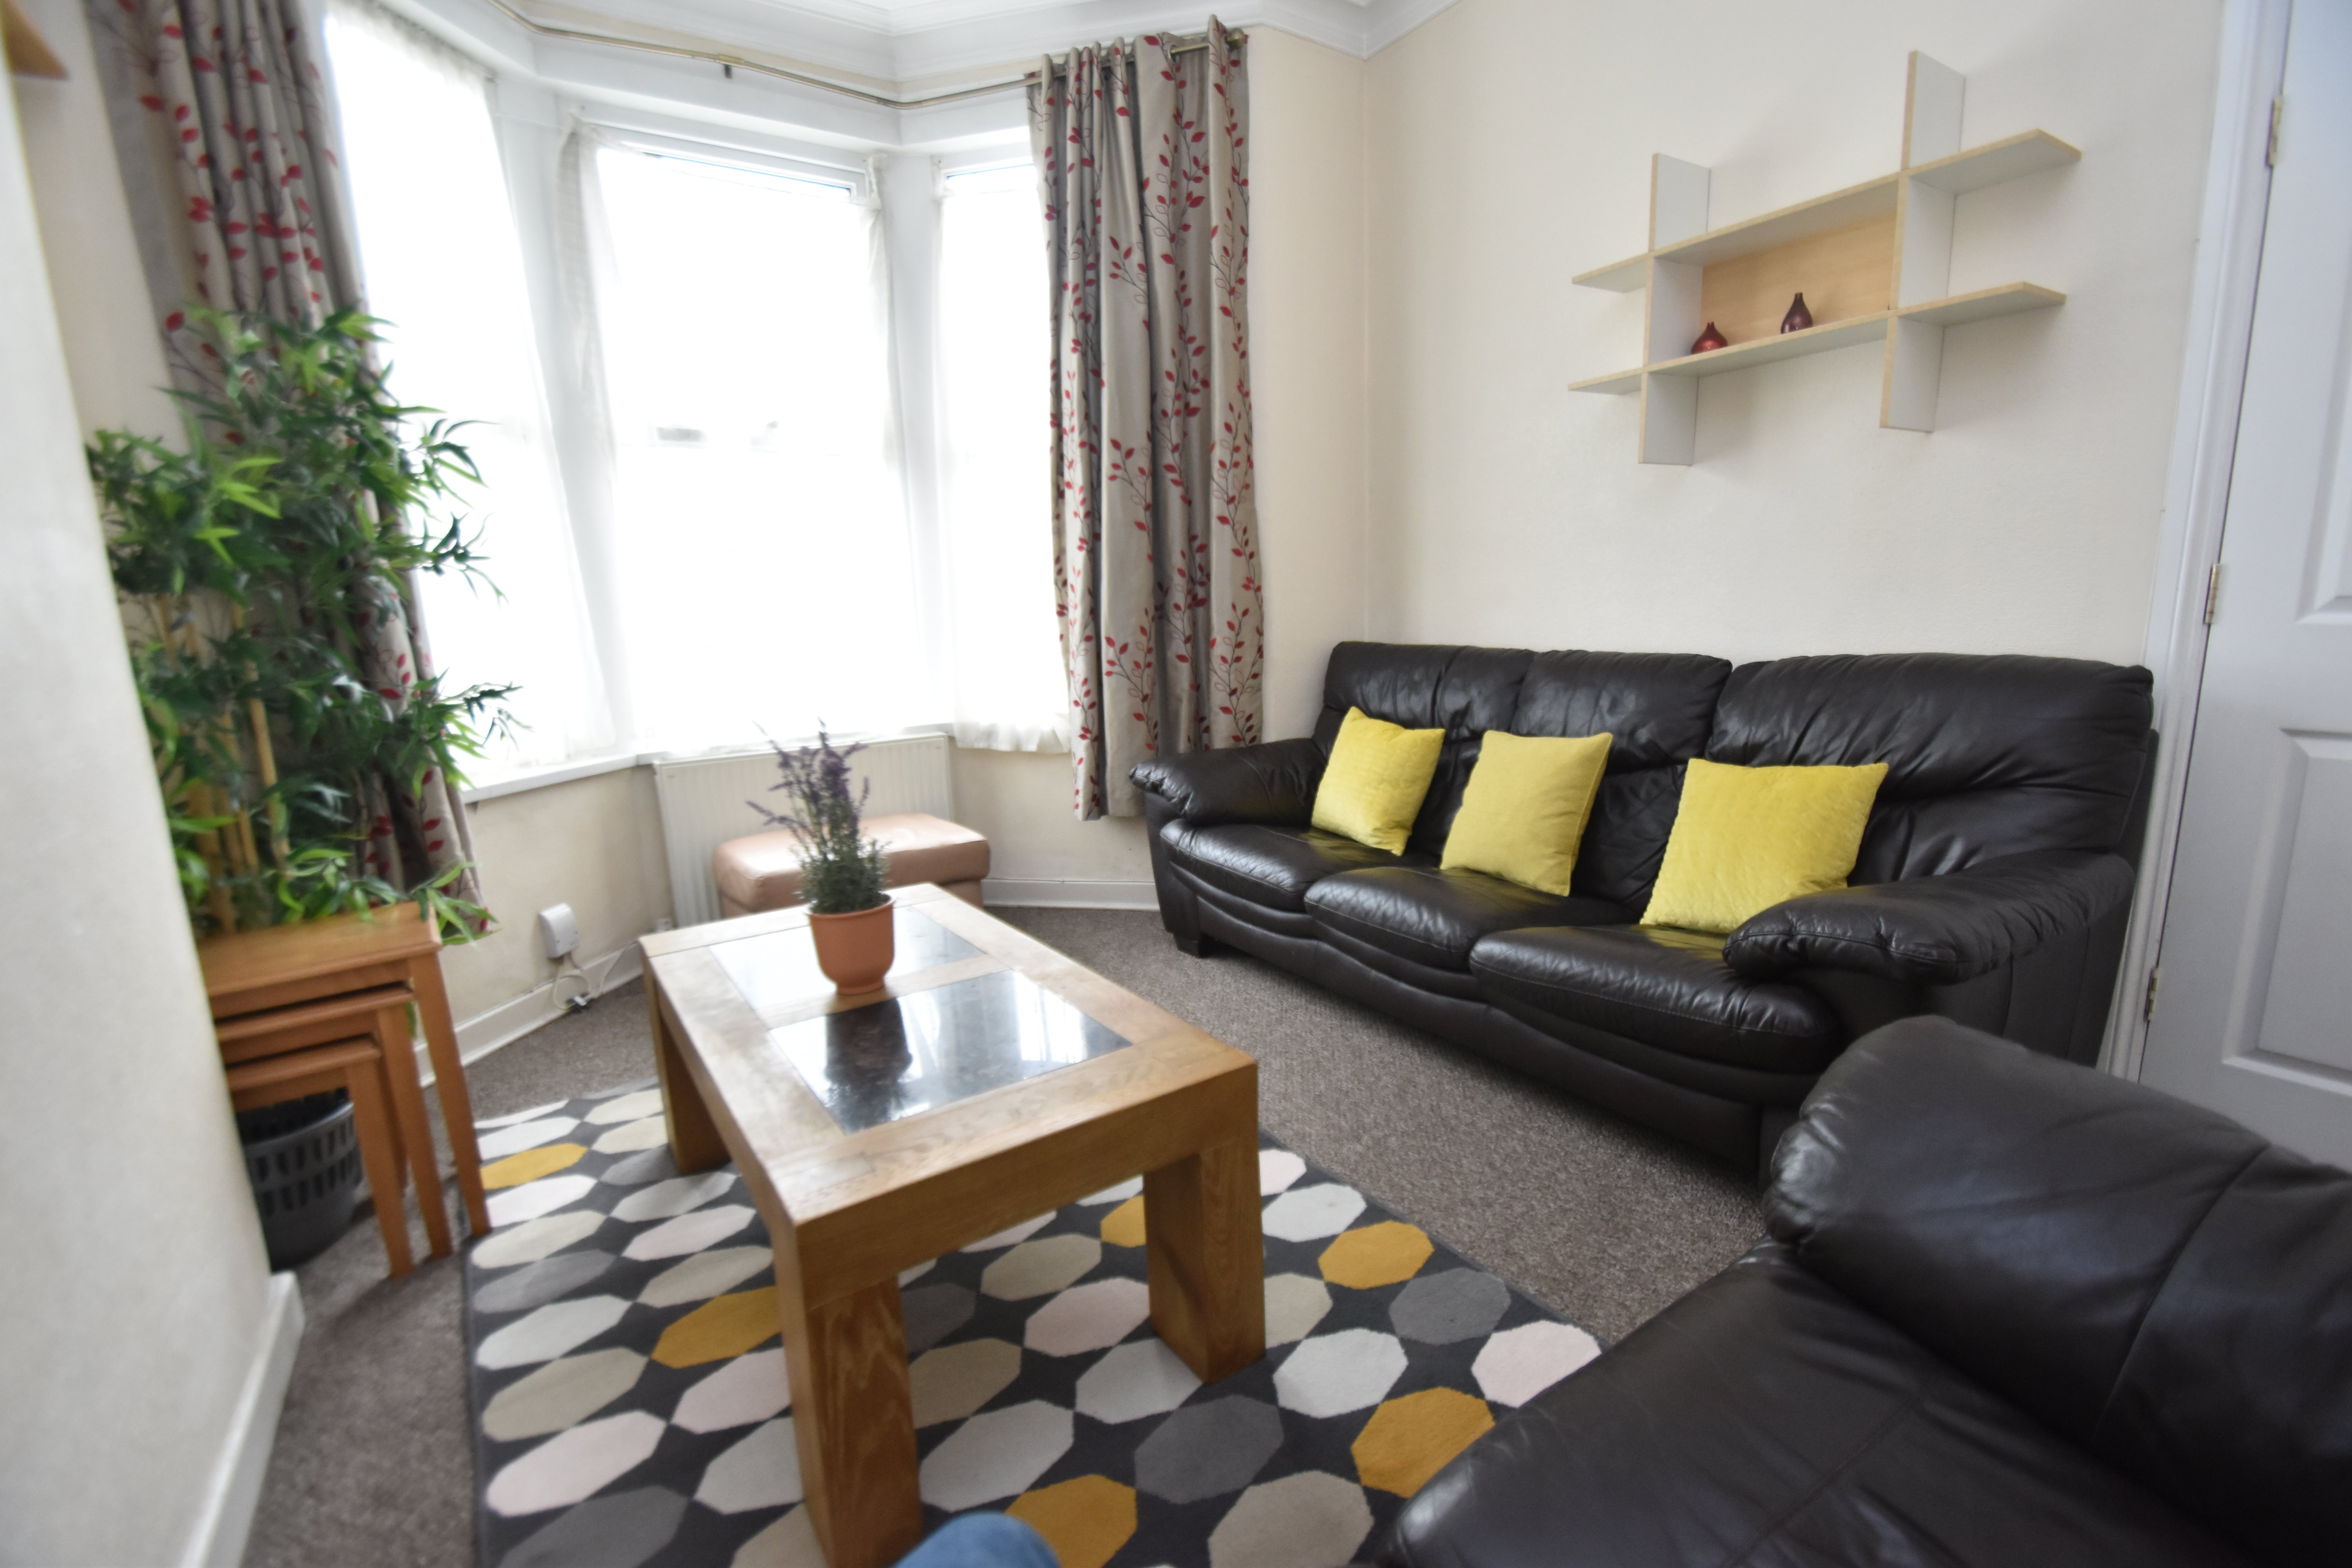 4 bed house to rent in Lisvane Street, Cathays  - Property Image 3